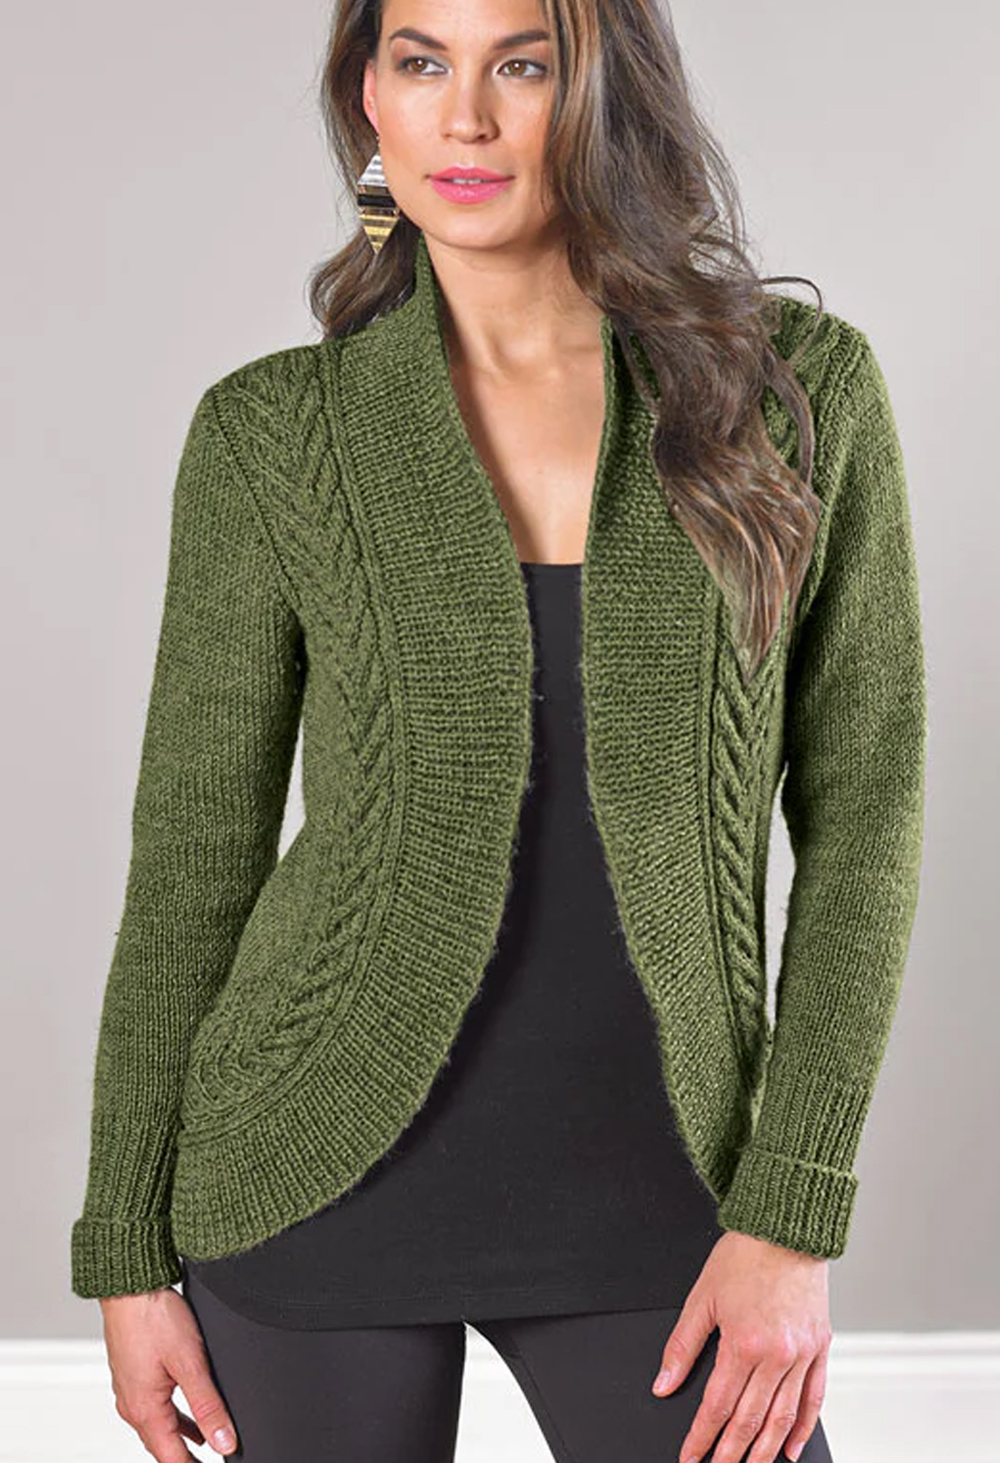 V-Cable Cardigan Knitting Pattern